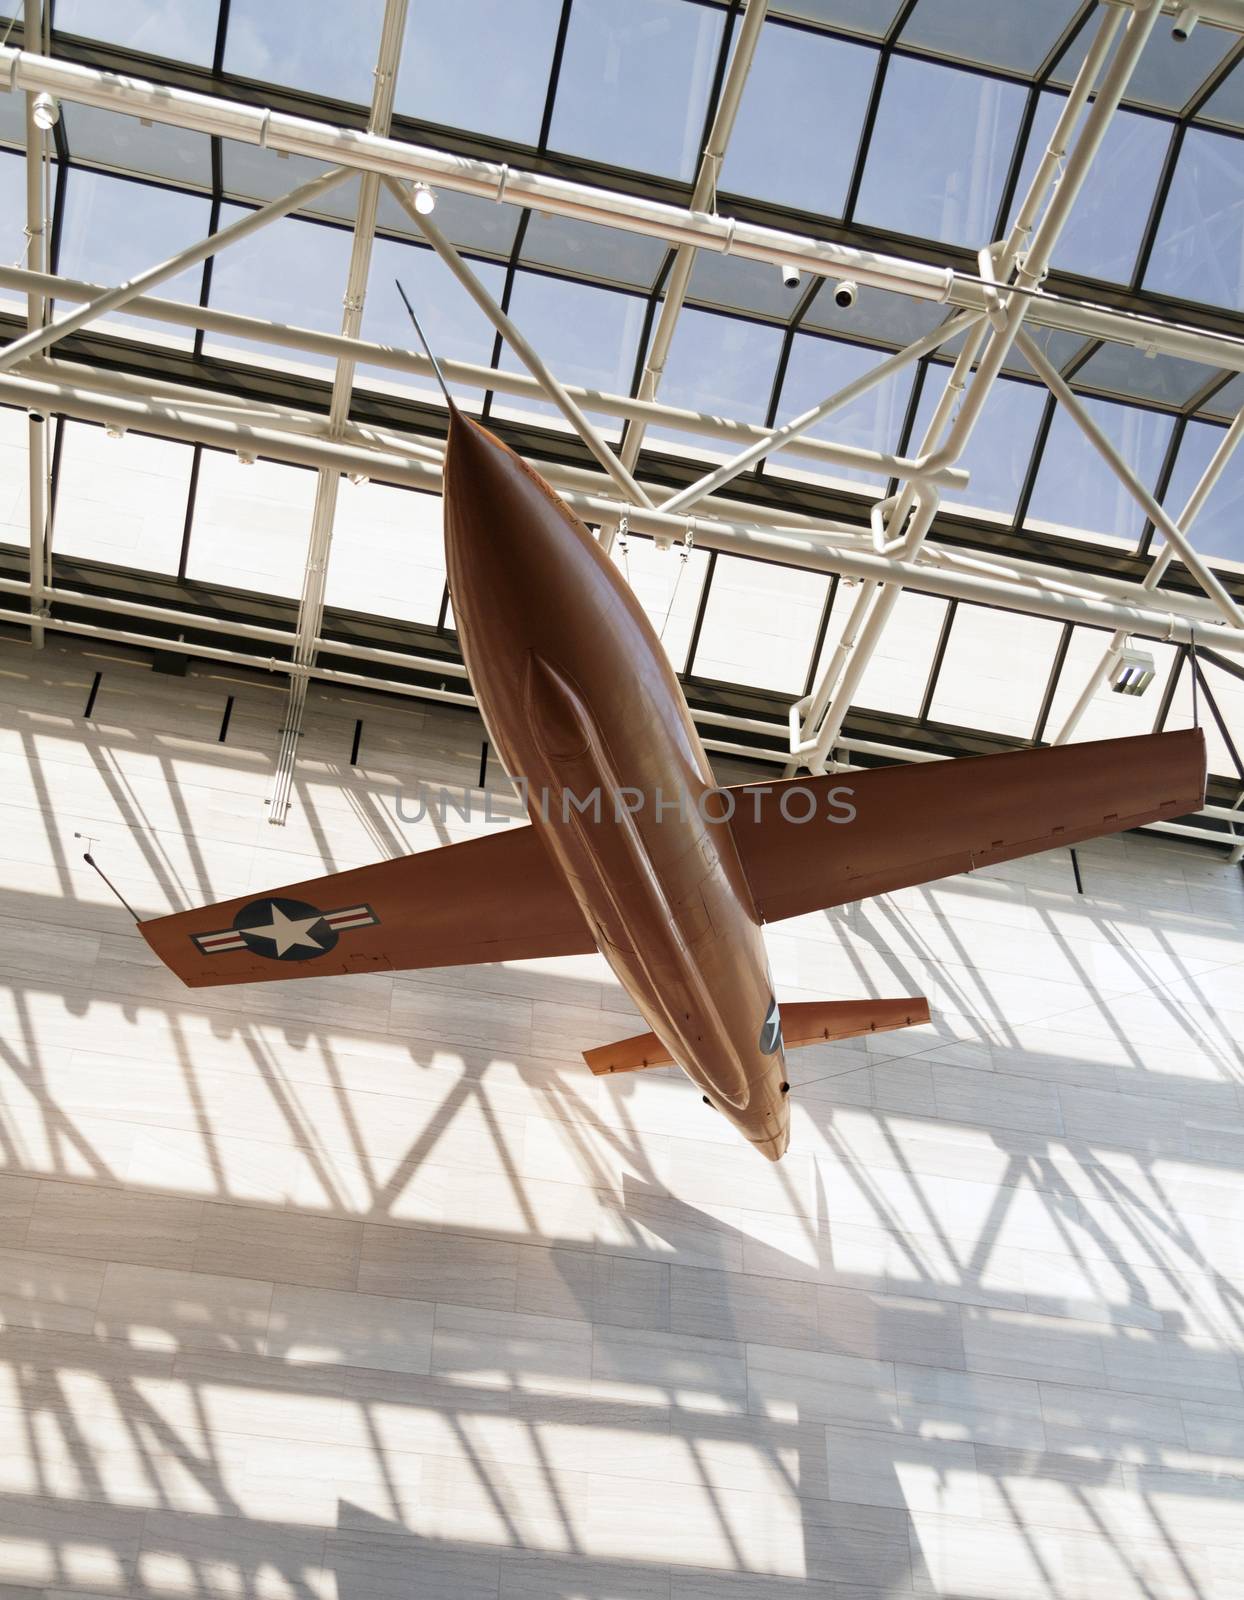 The Bell X-1 was the first airplane to fly faster then the speed of sound.  Built by the US Airforce in October 14, 1947 and caption was Charles E. Yeager